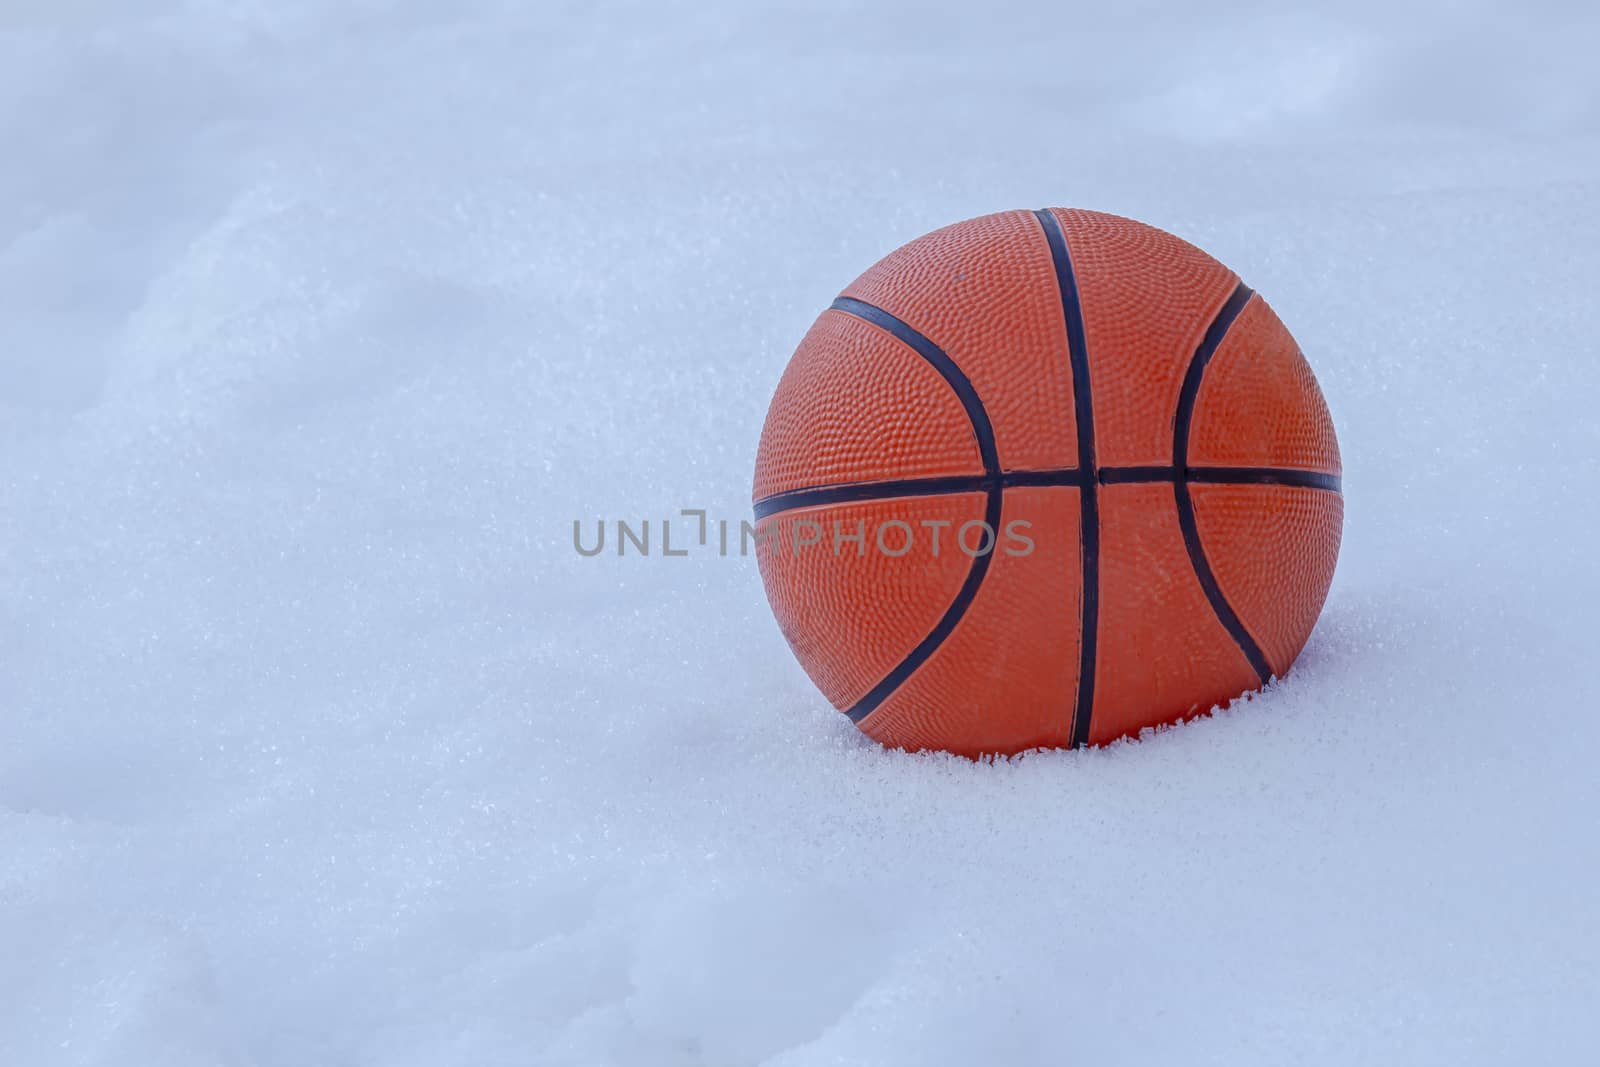 Basket ball on snow during winter by oasisamuel